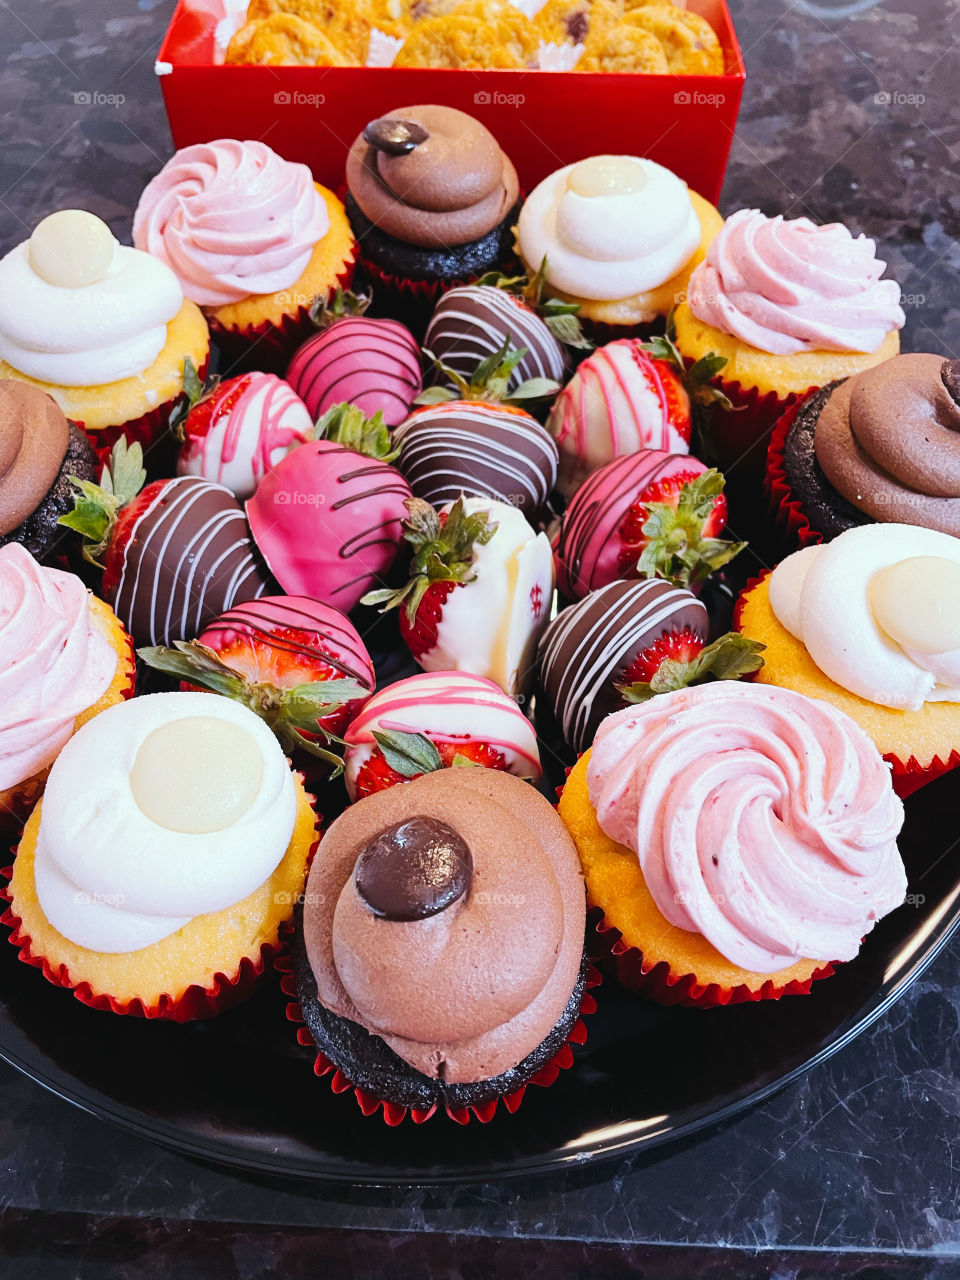 Cupcakes and chocolate covered strawberries 